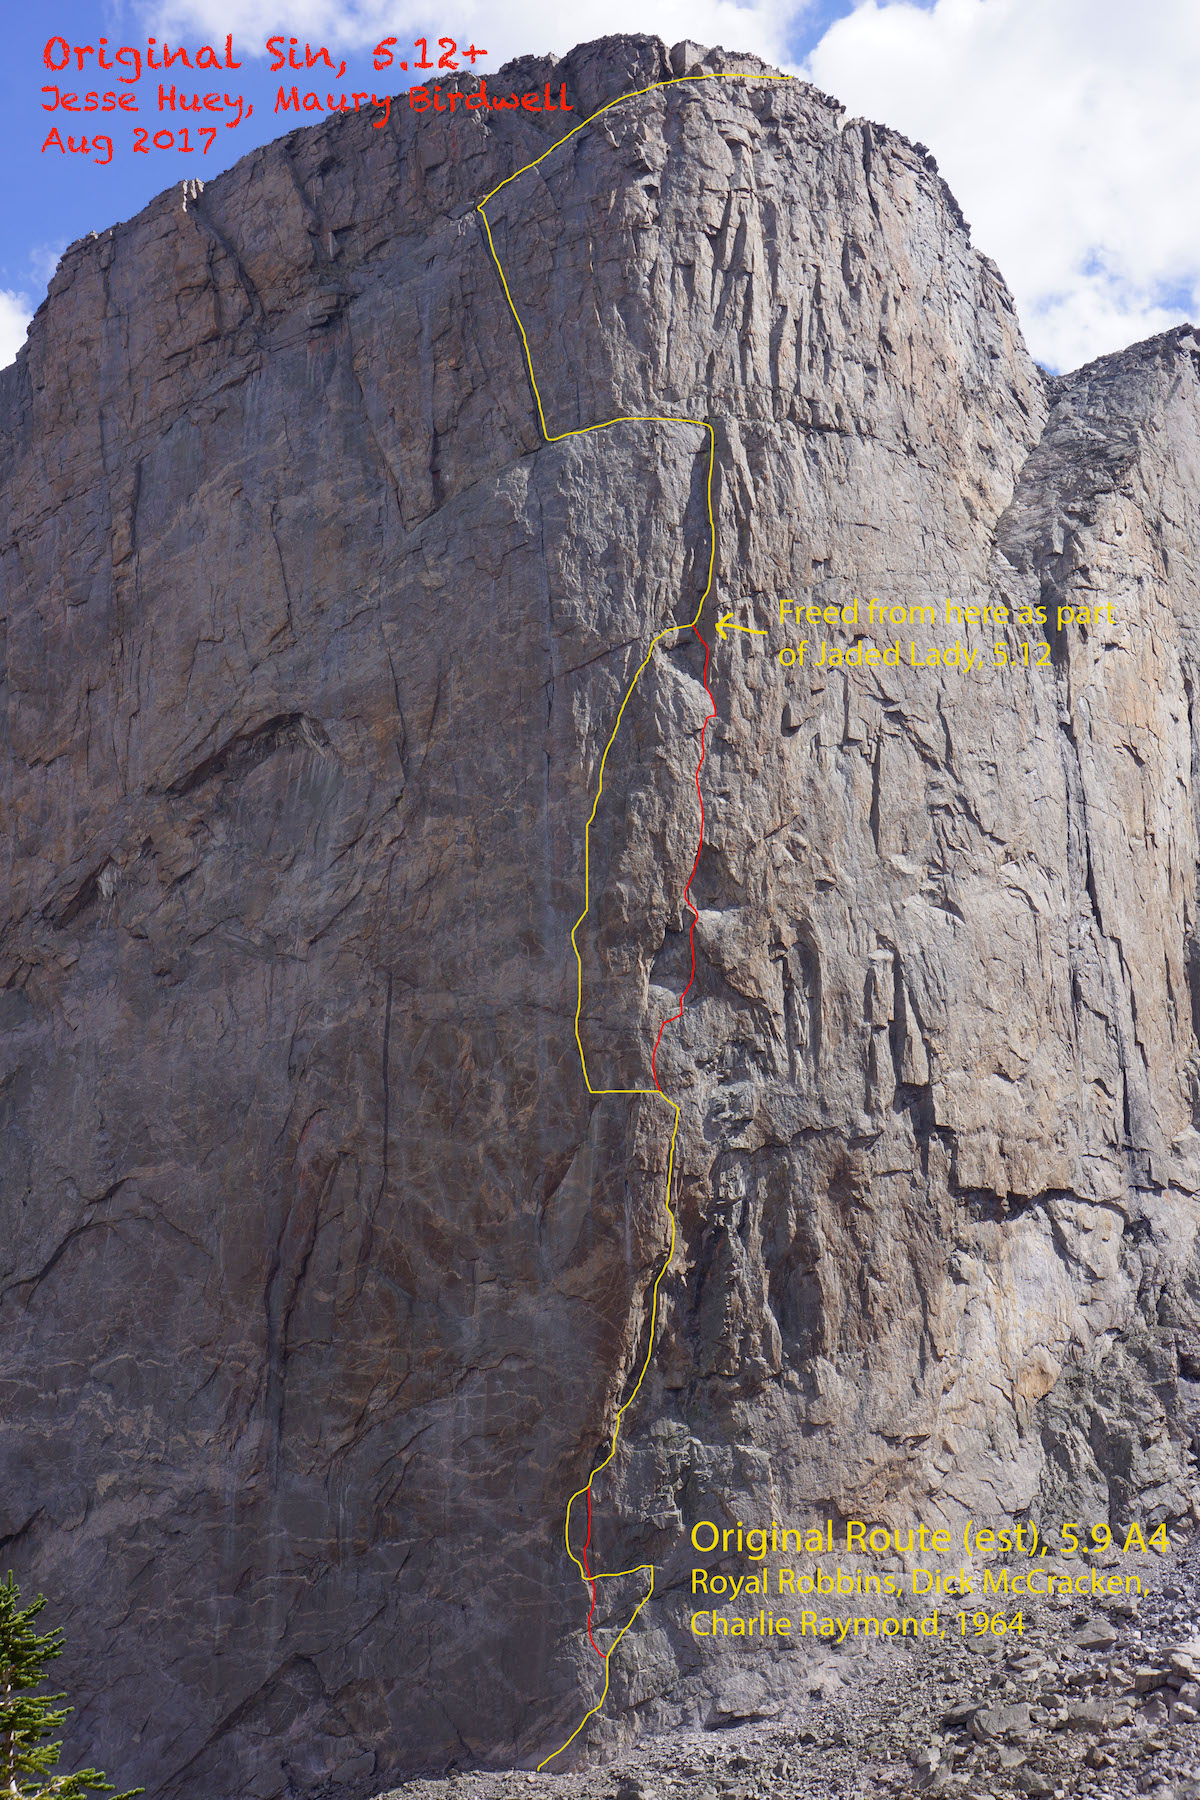 The yellow line shows the Original Route and the red lines mark the free variations of Original Sin. A route description and topo can be found here on MountainProject.com. [Image] Maury Birdwell